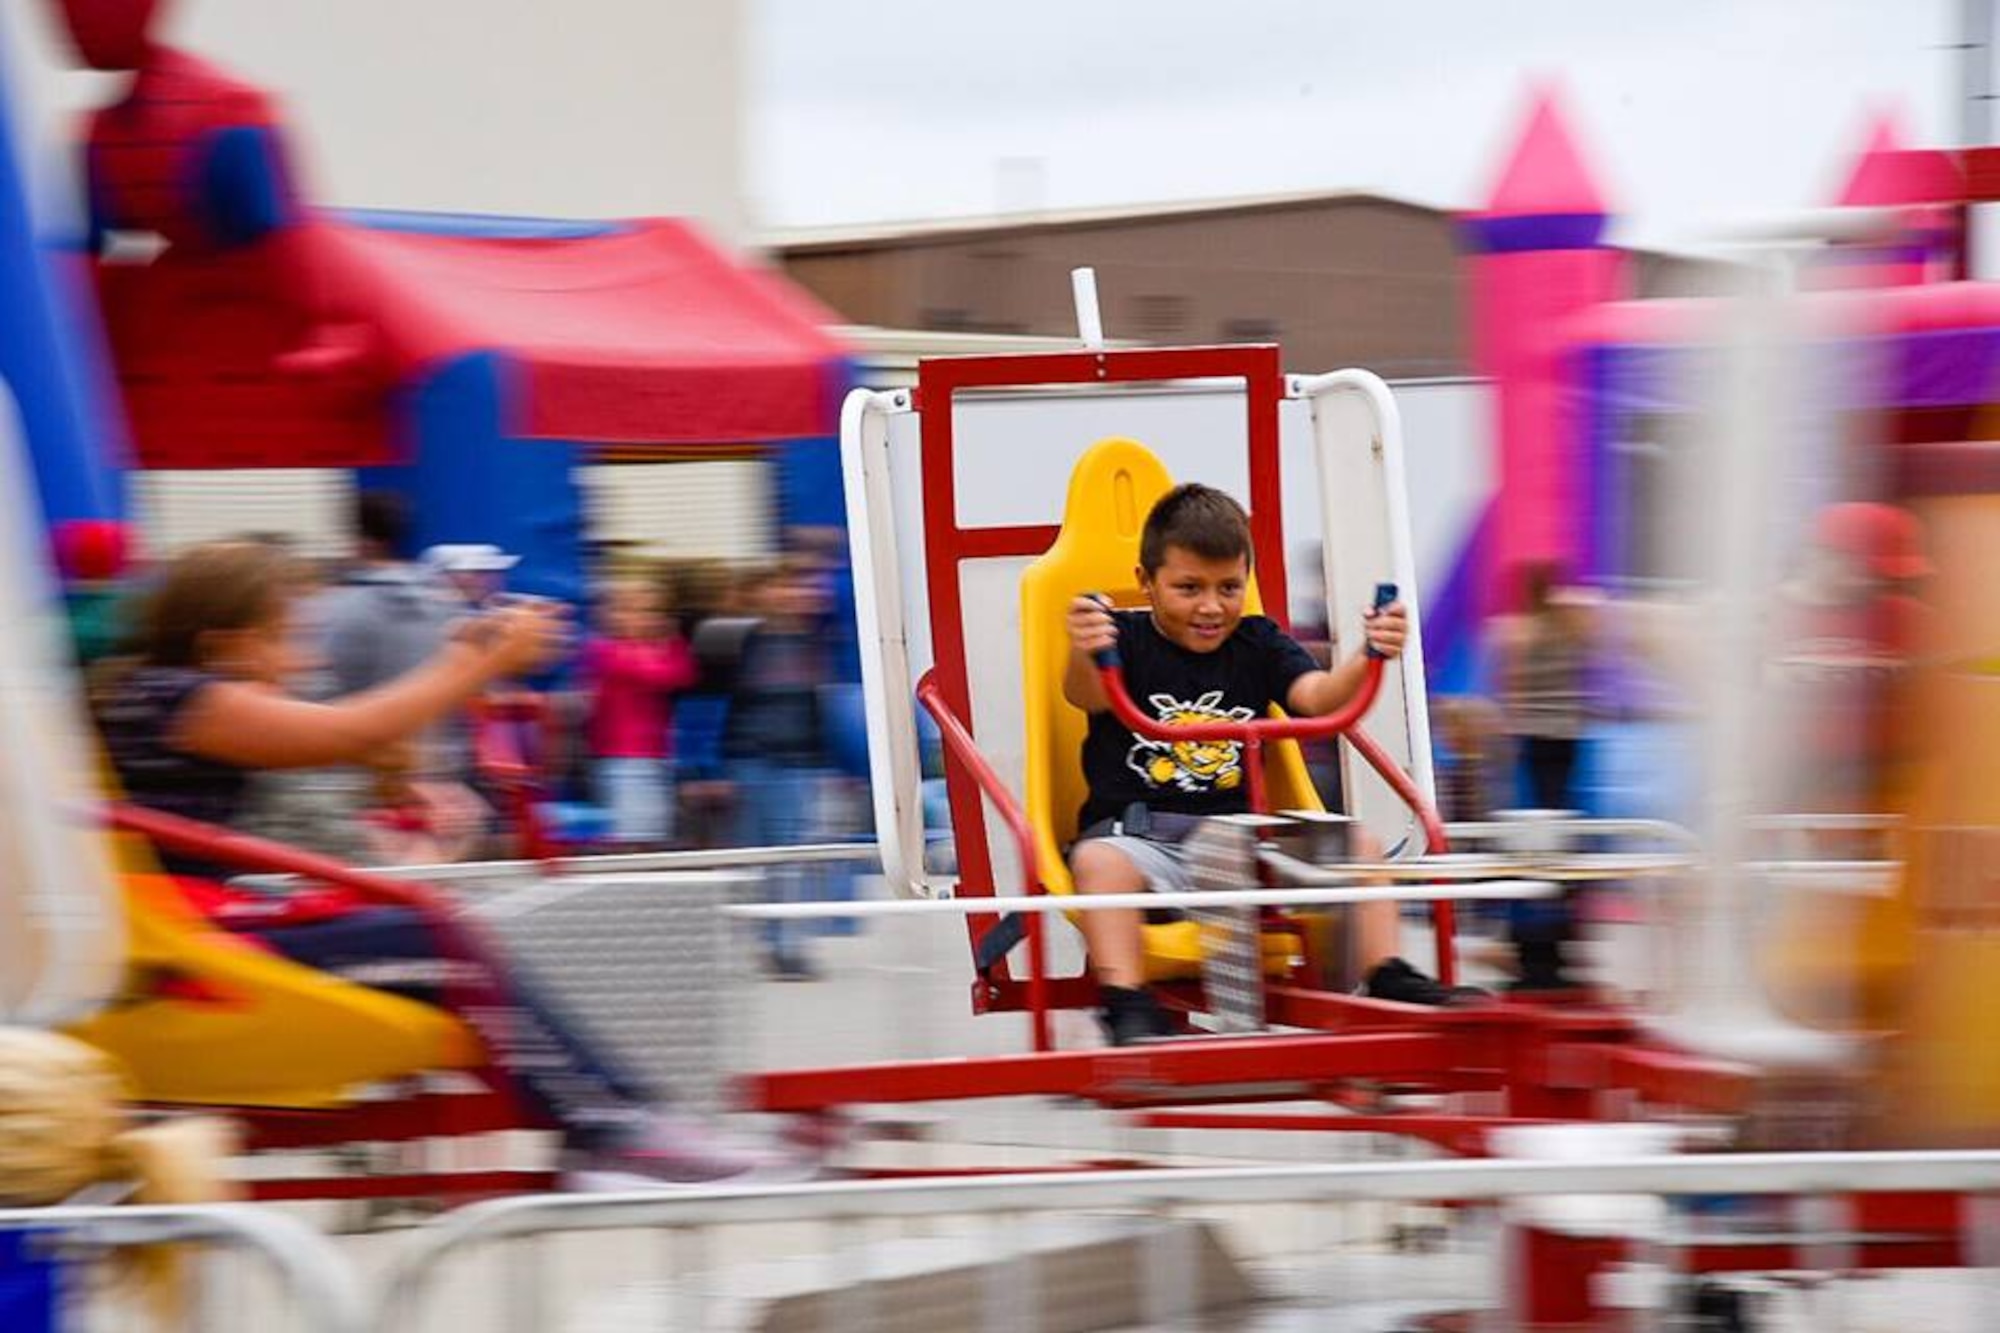 A child plays on a carnival ride at the Frontiers in Flight Open House and Air Show Sept. 8, 2018, at McConnell Air Force Base, Kansas. The show offered a “Kid Zone” where children could play while waiting for their favorite aerobatic performances. (U.S. Air Force photo by Airman 1st Class Michaela R. Slanchik)